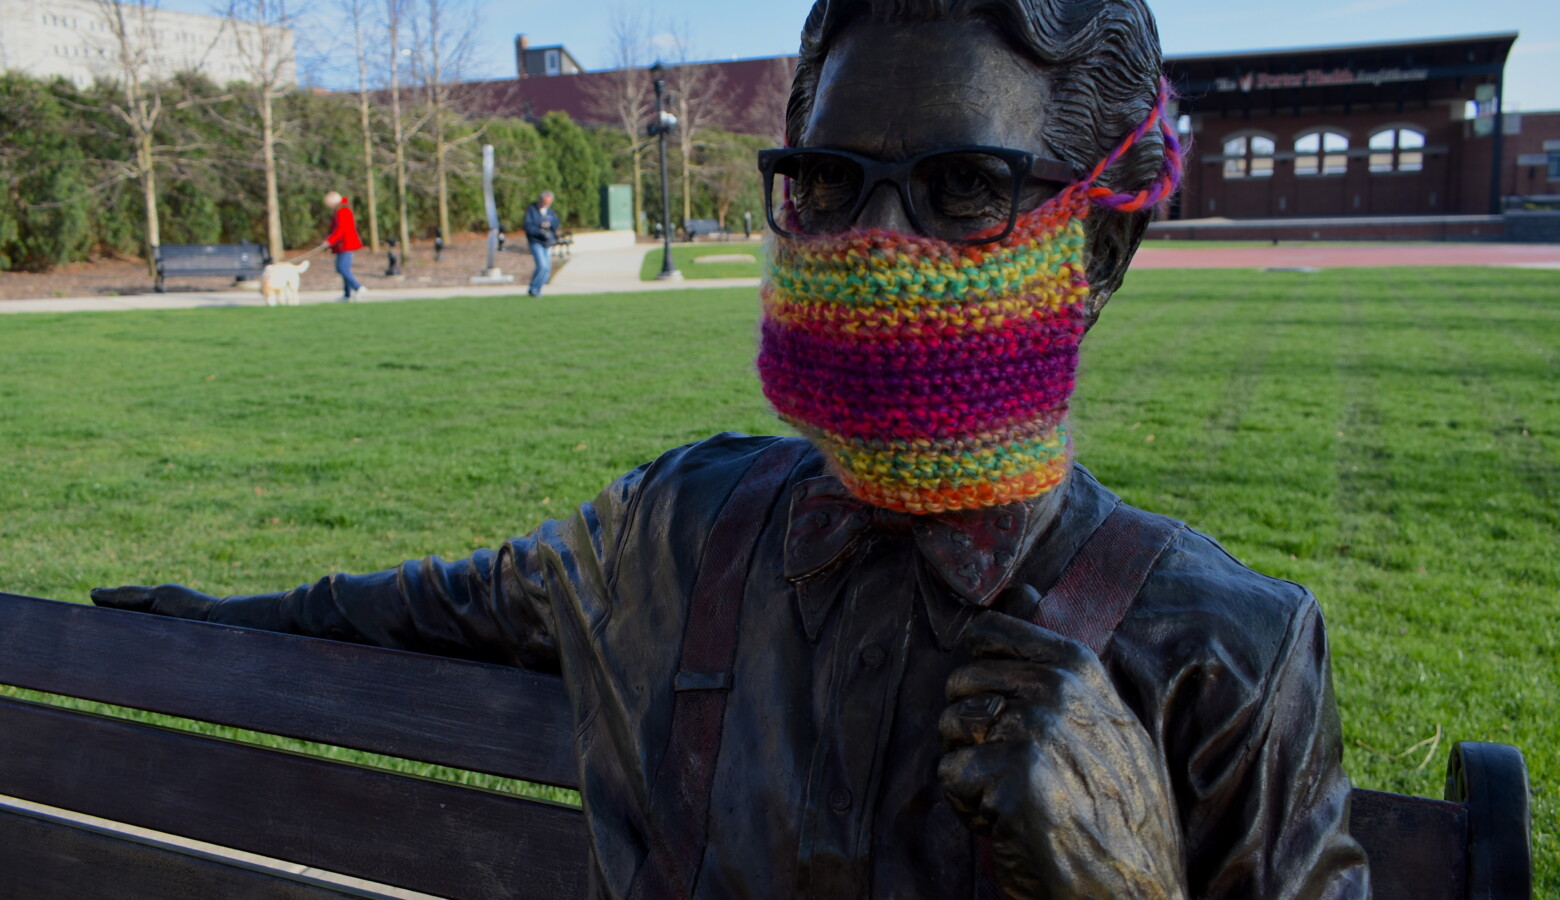 A statue of Orville Redenbacher in downtown Valparaiso with a knit mask over its face. (Justin Hicks/IPB News)